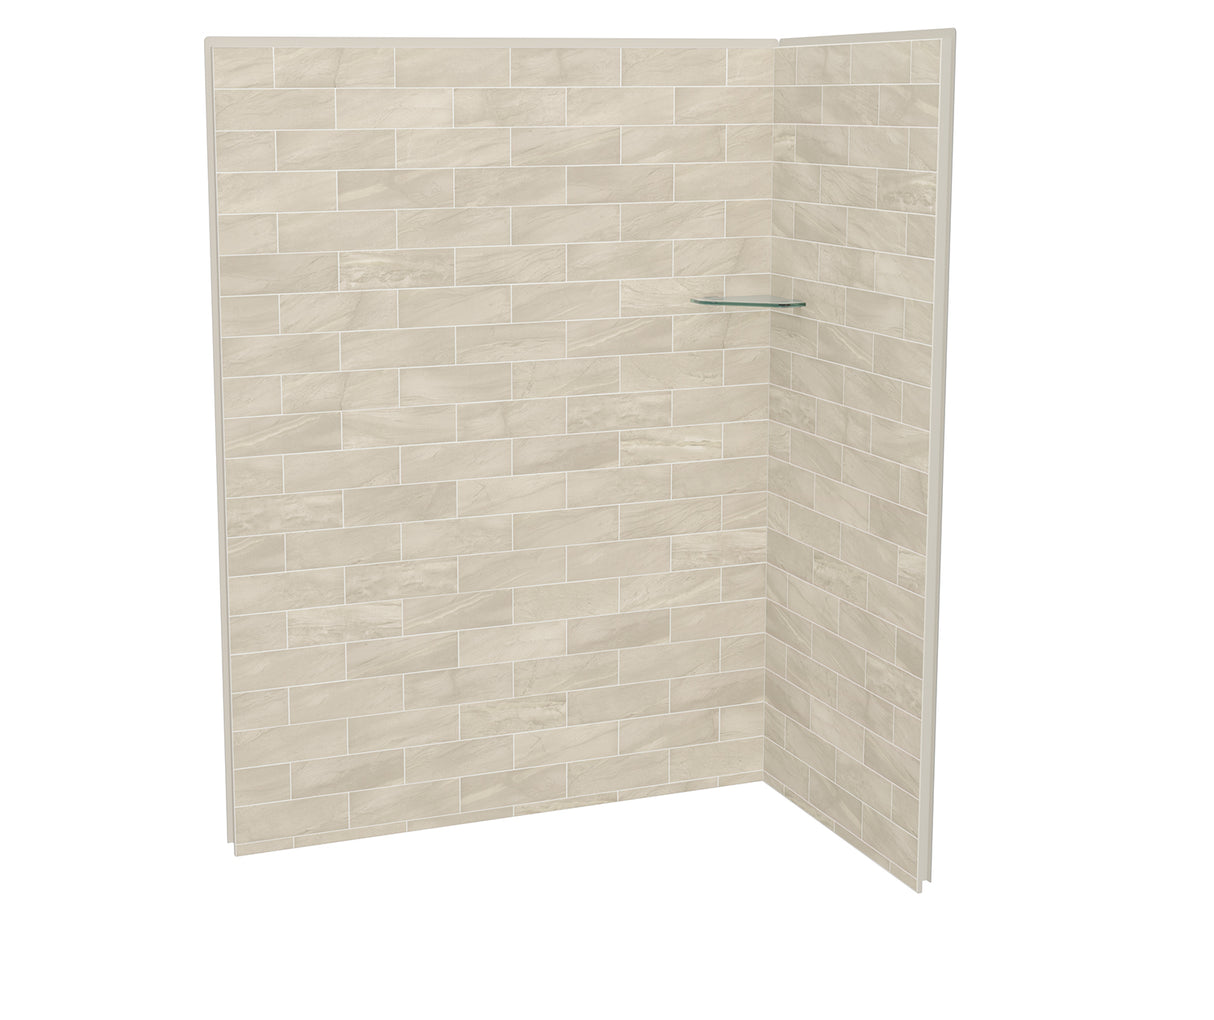 MAAX 107465-312-507 Utile 6032 Composite Direct-to-Stud Two-Piece Corner Shower Wall Kit in Organik Loam